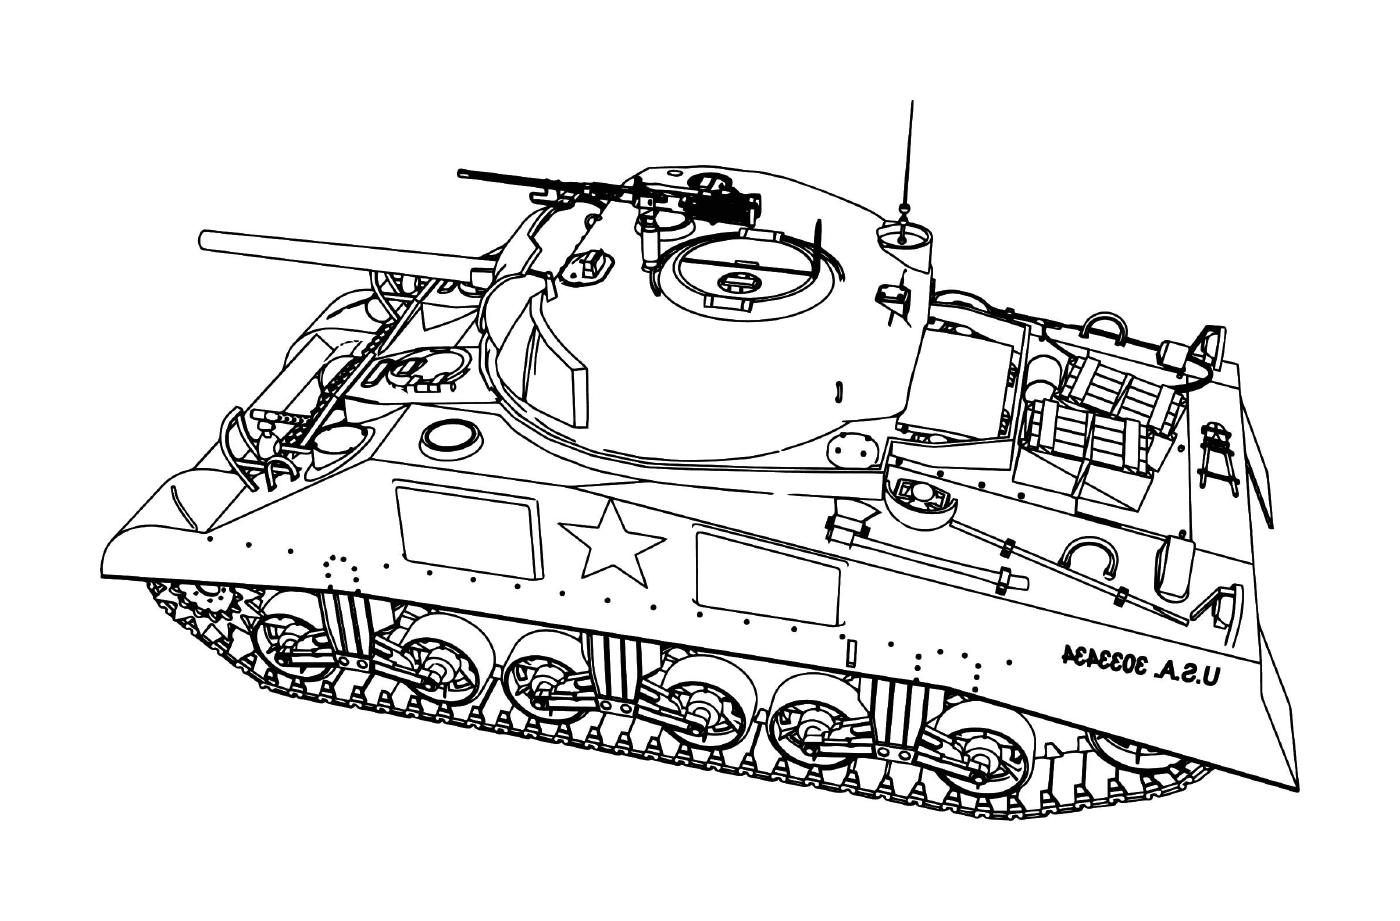  Tank Char Dassault of the American Army (USA): a tank with a star 